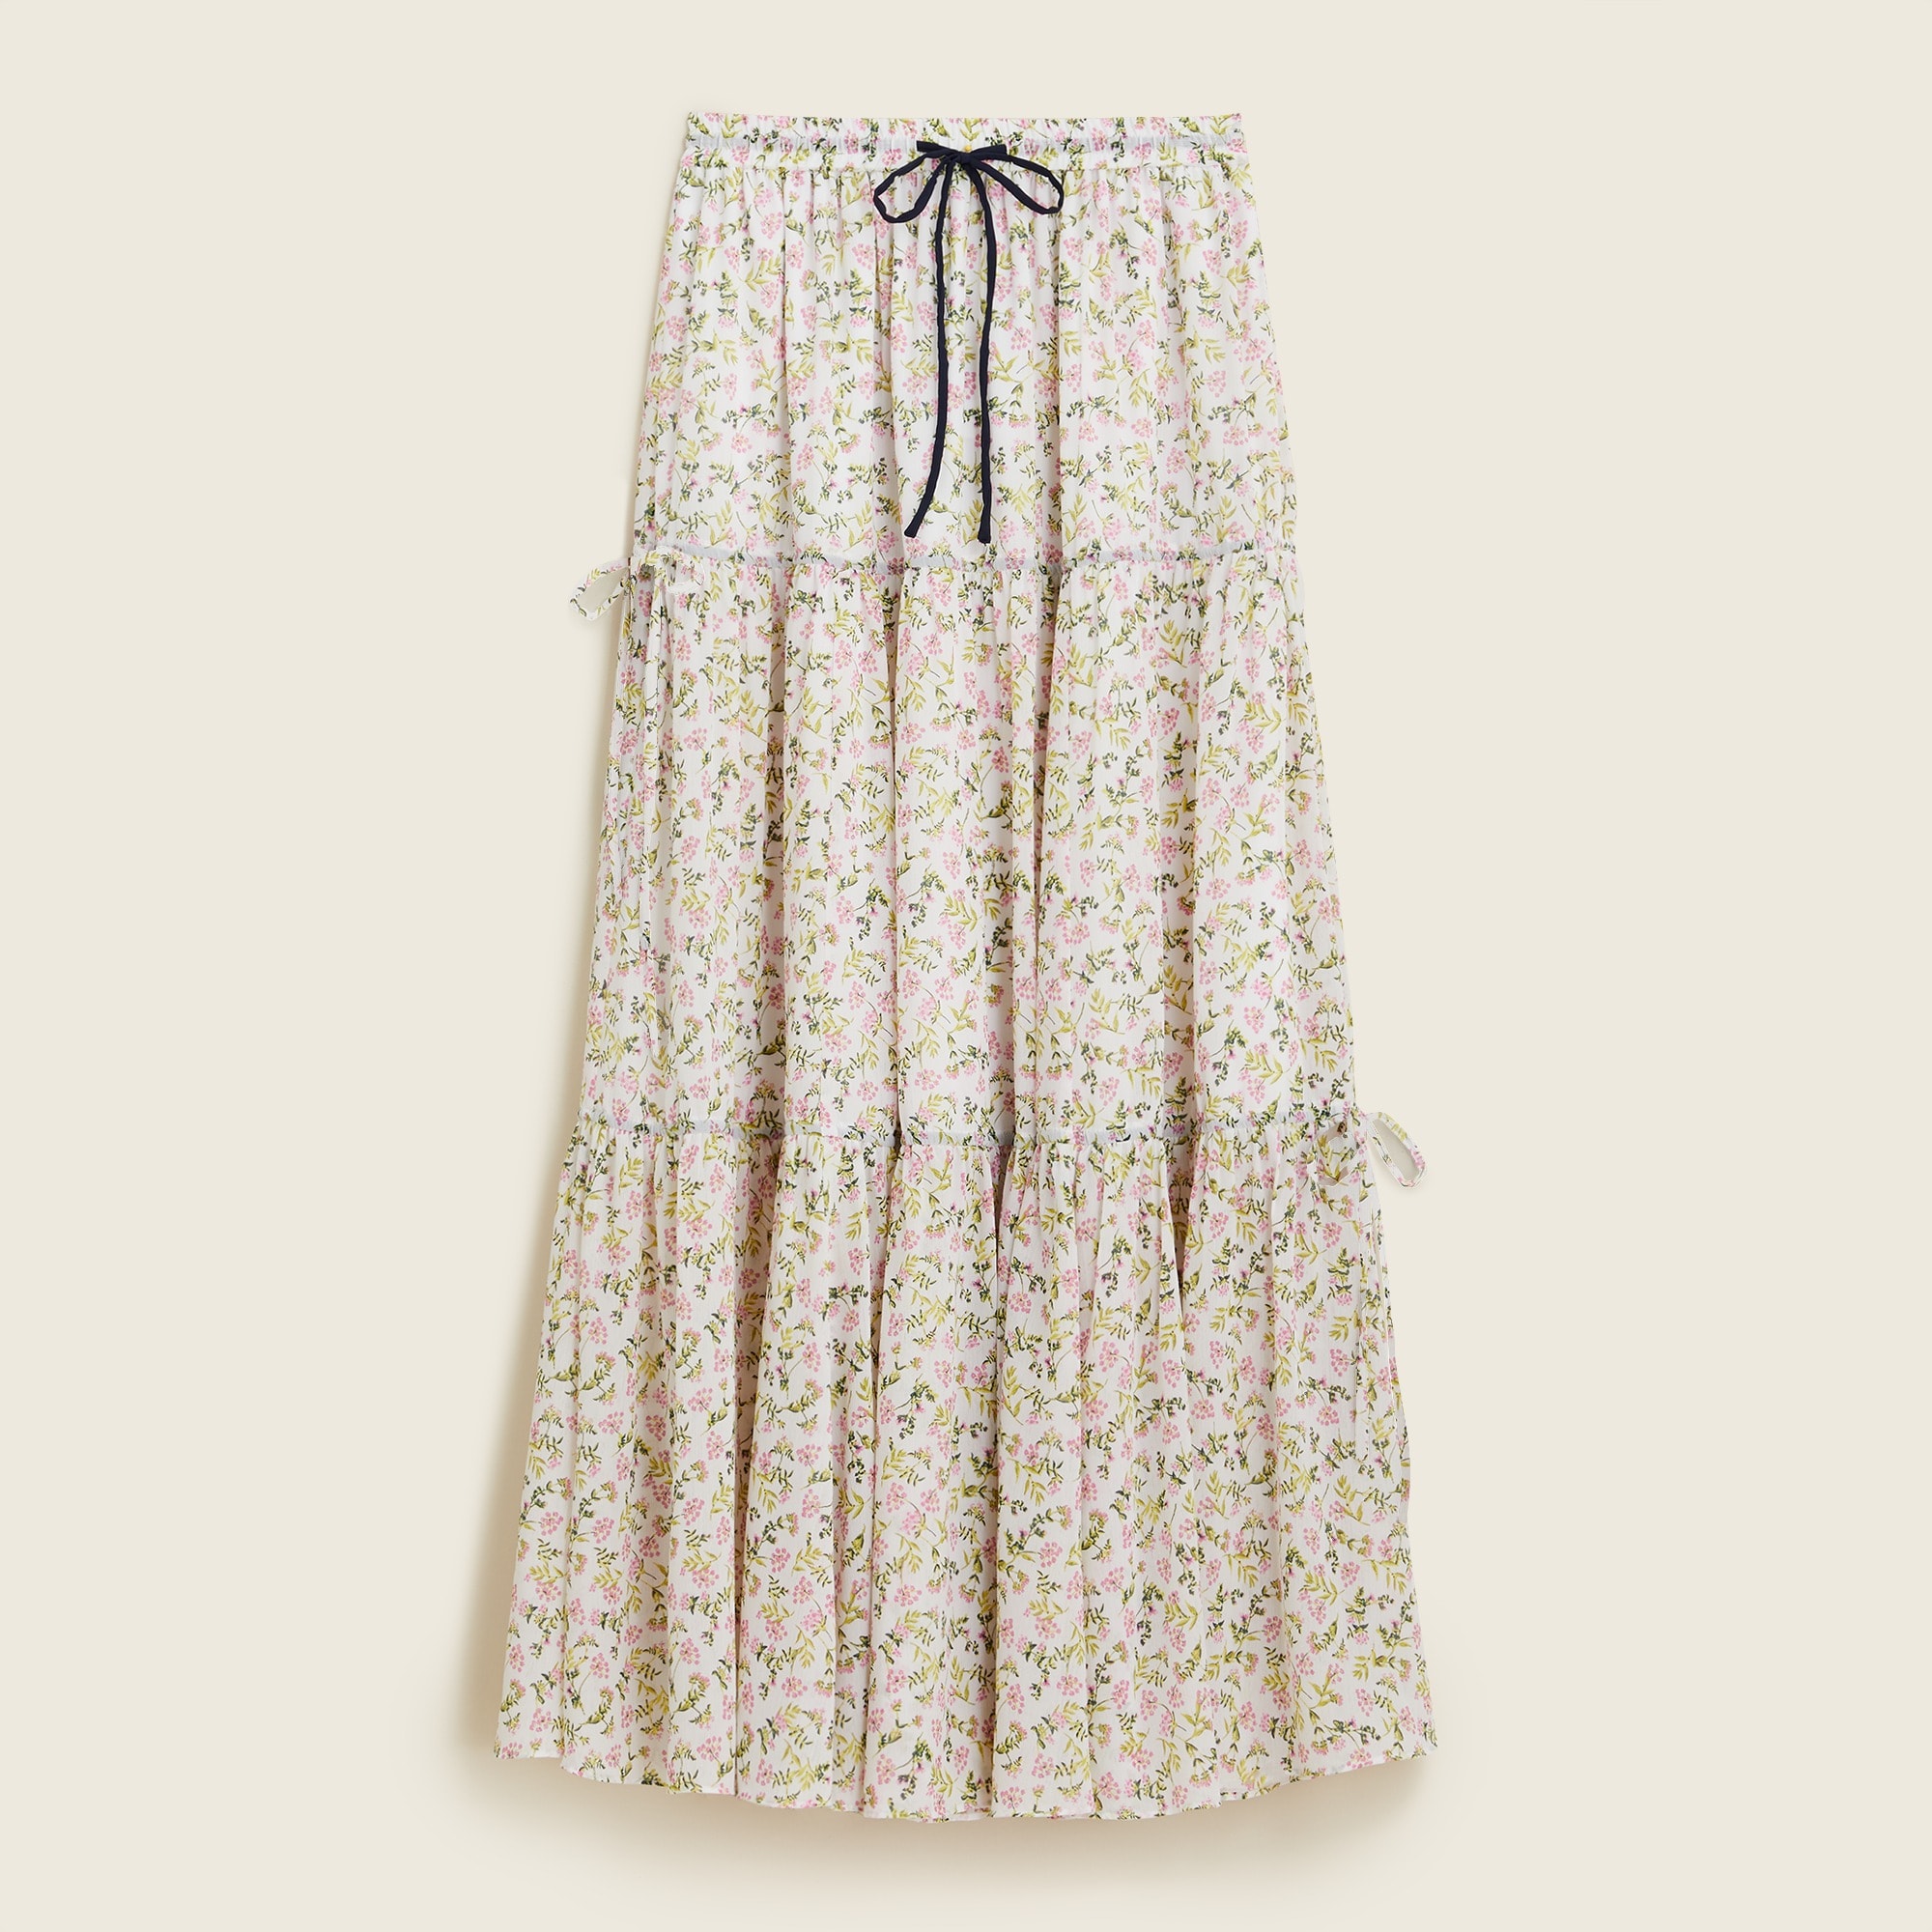 J.Crew: Tiered Chiffon Maxi Skirt In Meadow Floral For Women